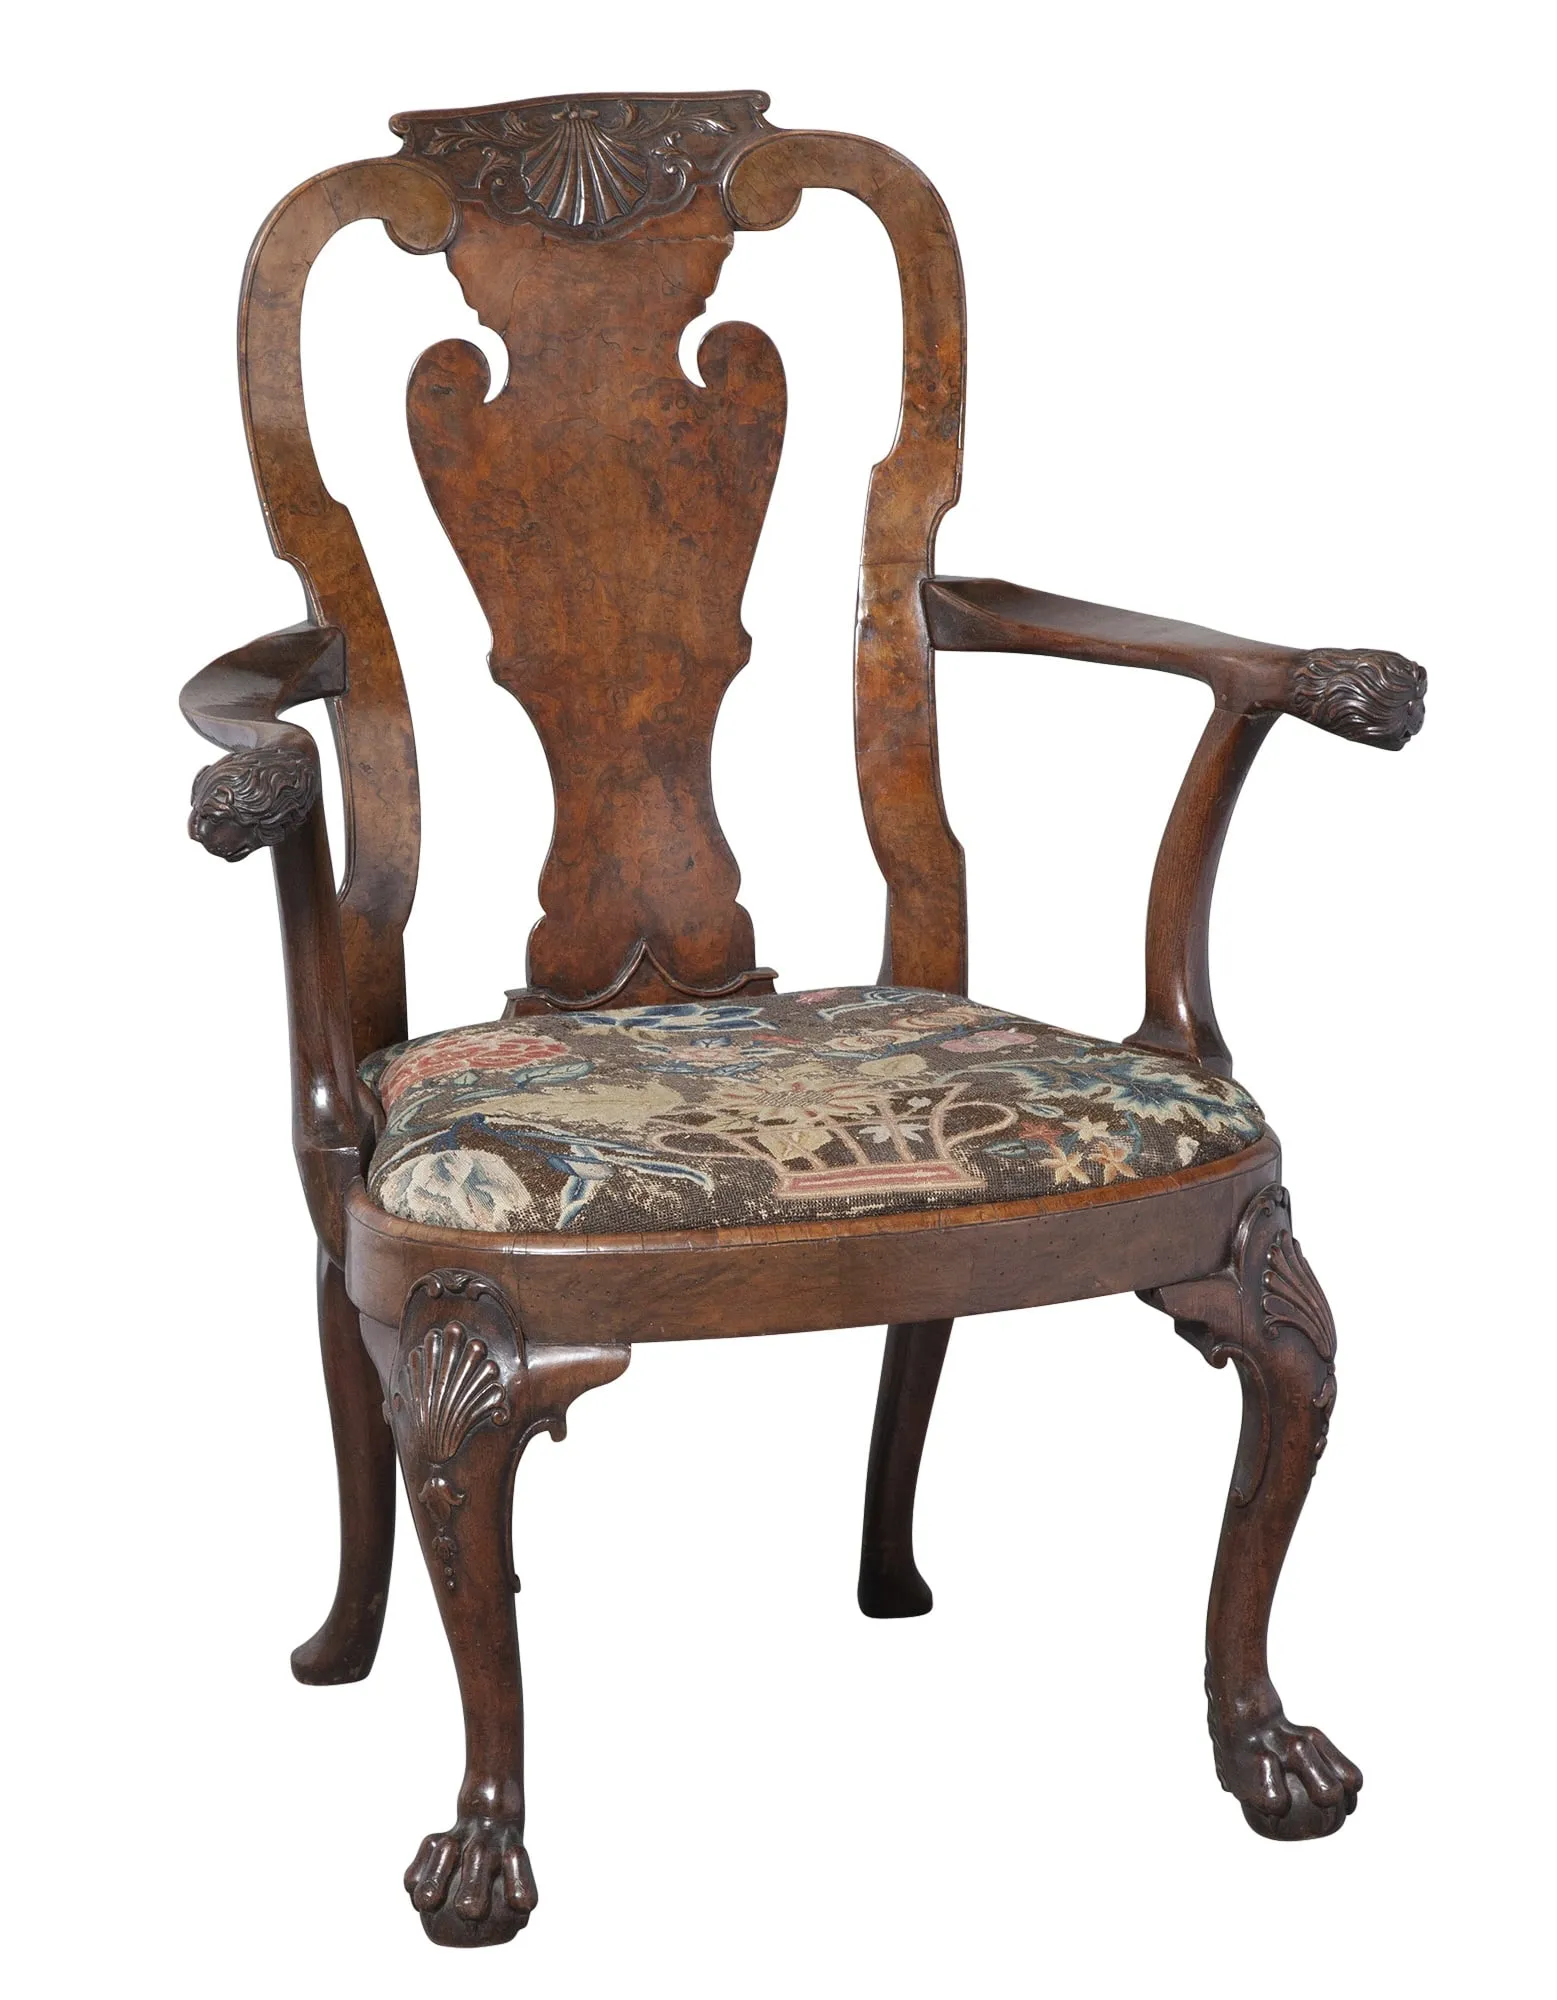 Manolovici estate George II armchairs, Faberge donkey carving stand out at Doyle Jan. 24-25